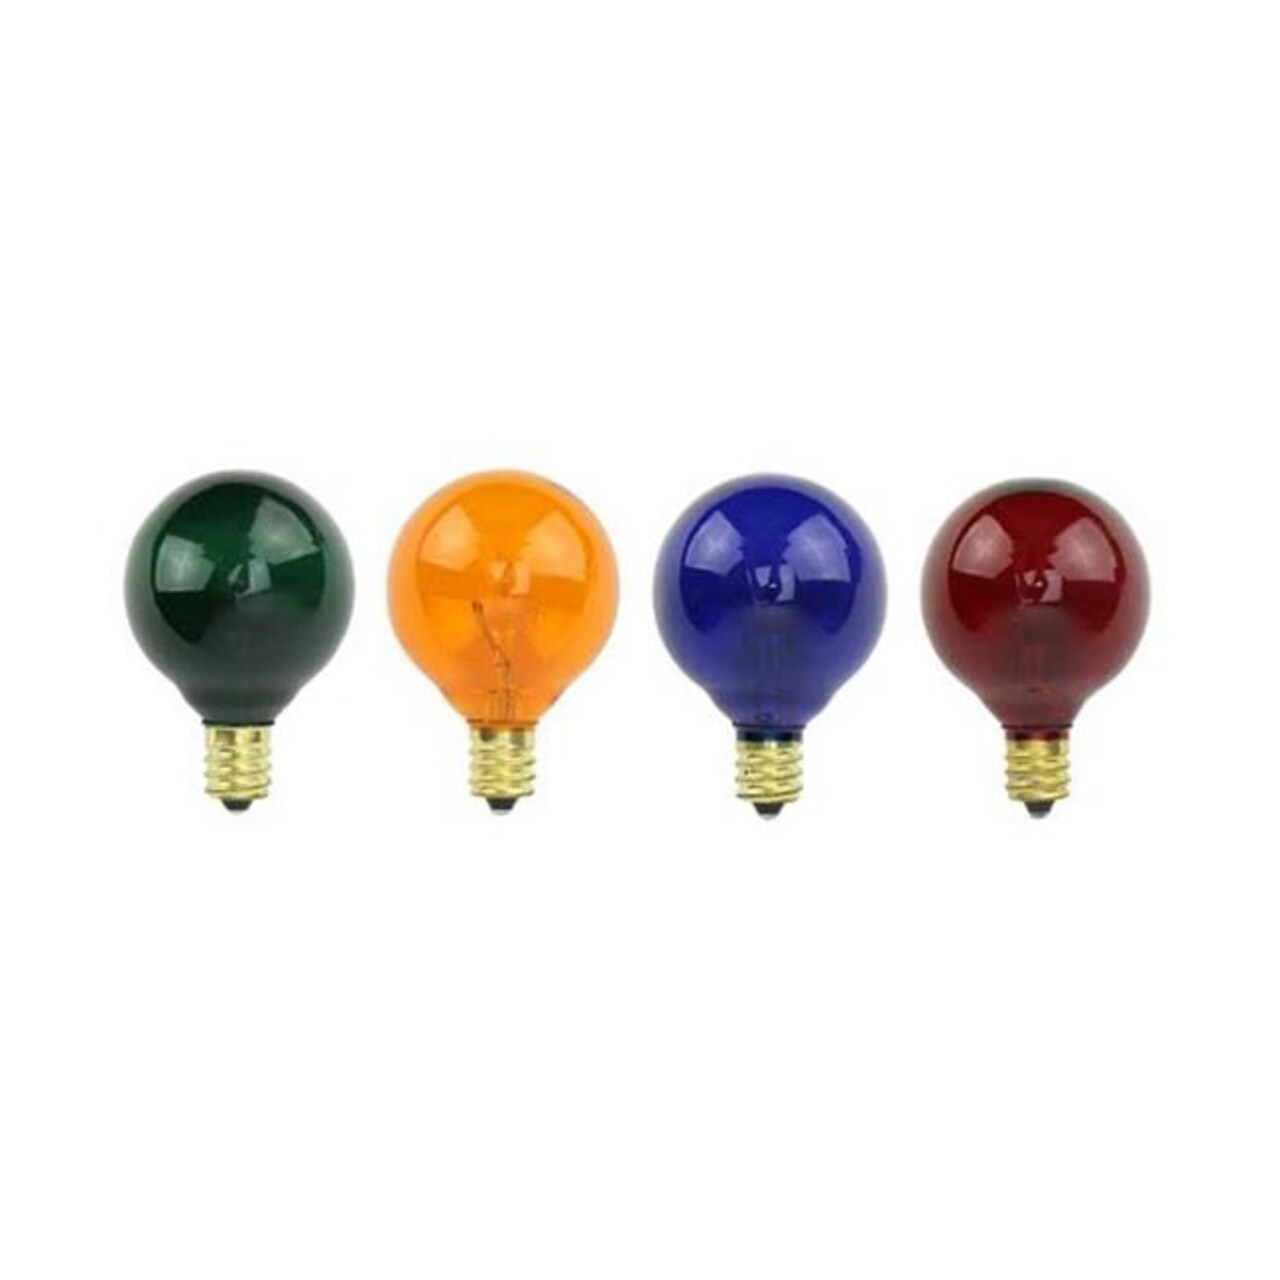 Northlight 32913381 120V 5W Transparent Multicolor G40 Globe Christmas Replacement Bulbs - Pack of 4